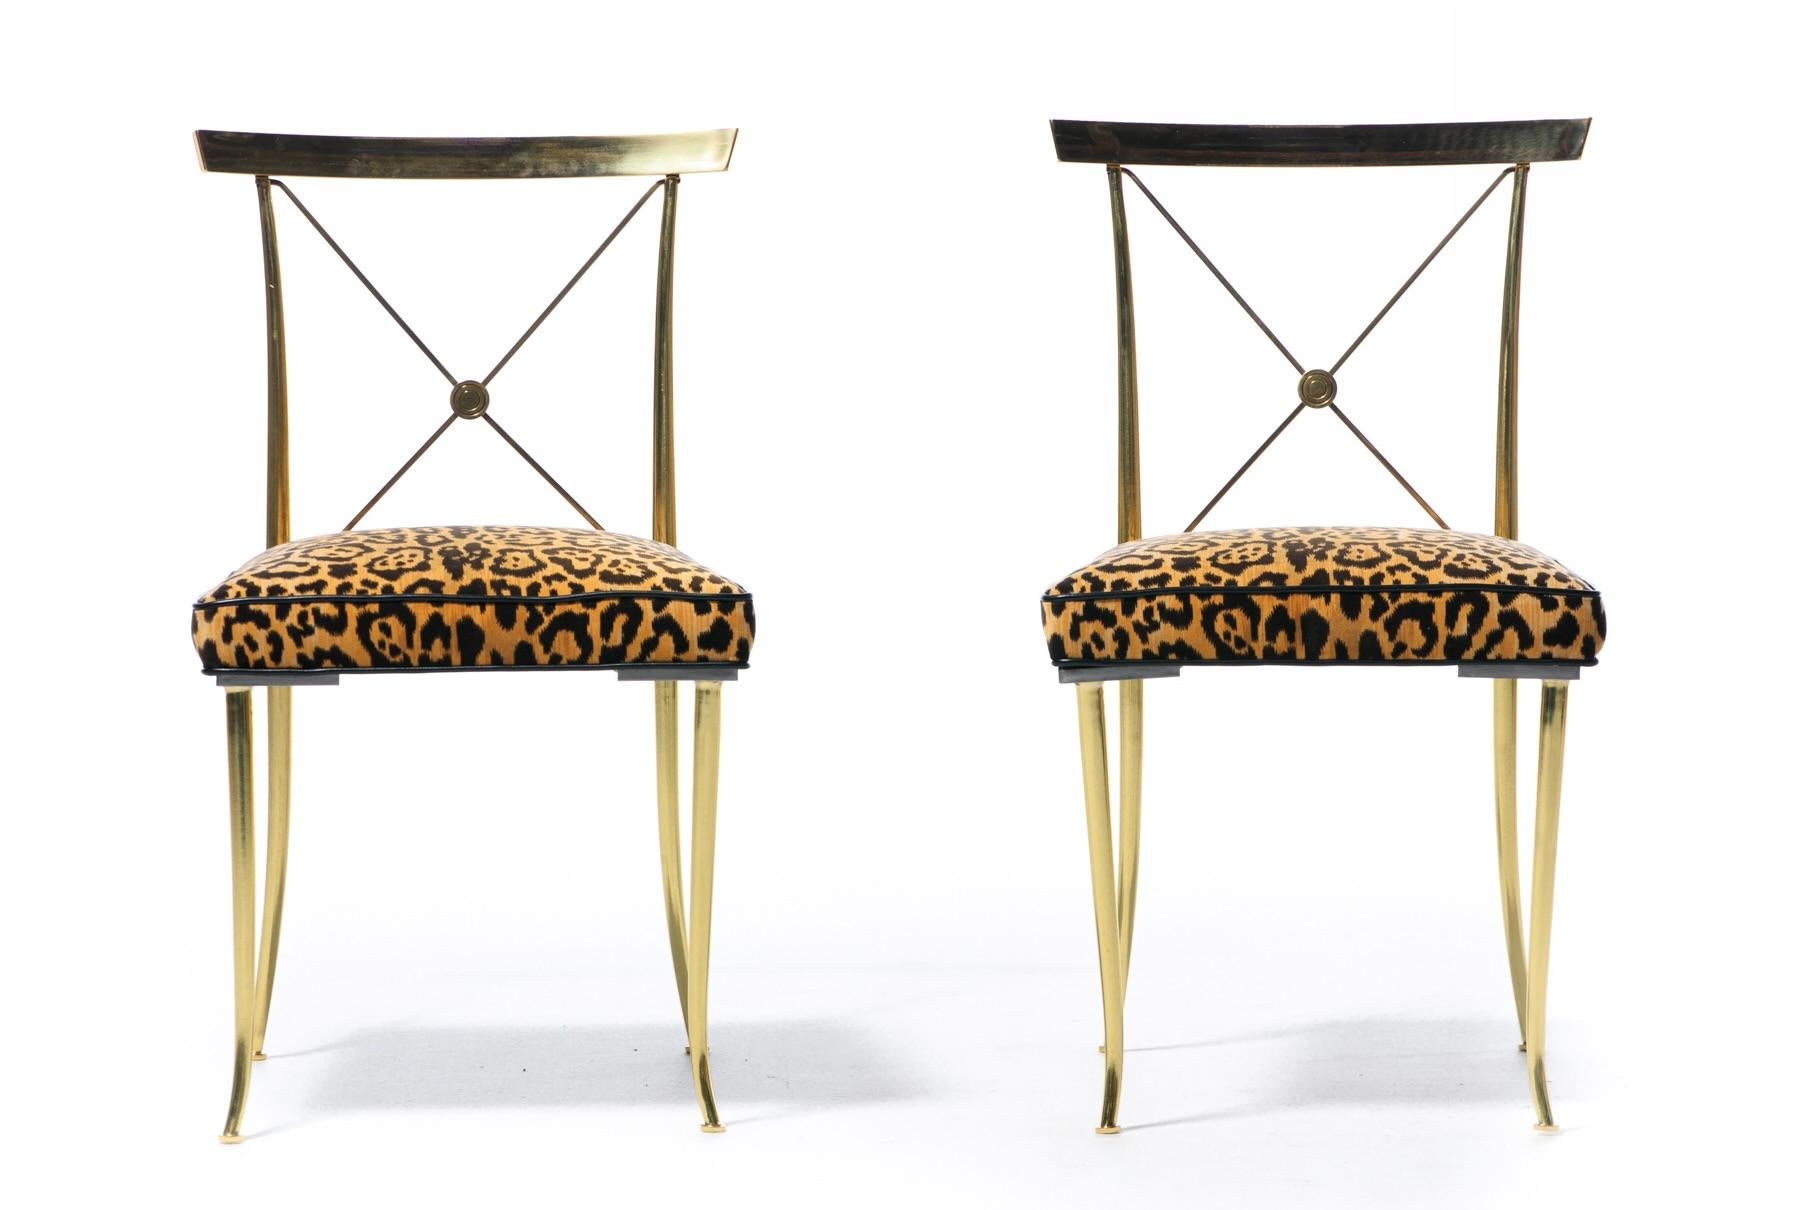 20th Century Hollywood Regency  Brass Neoclassical Side Chairs in Leopard Velvet & Leather For Sale